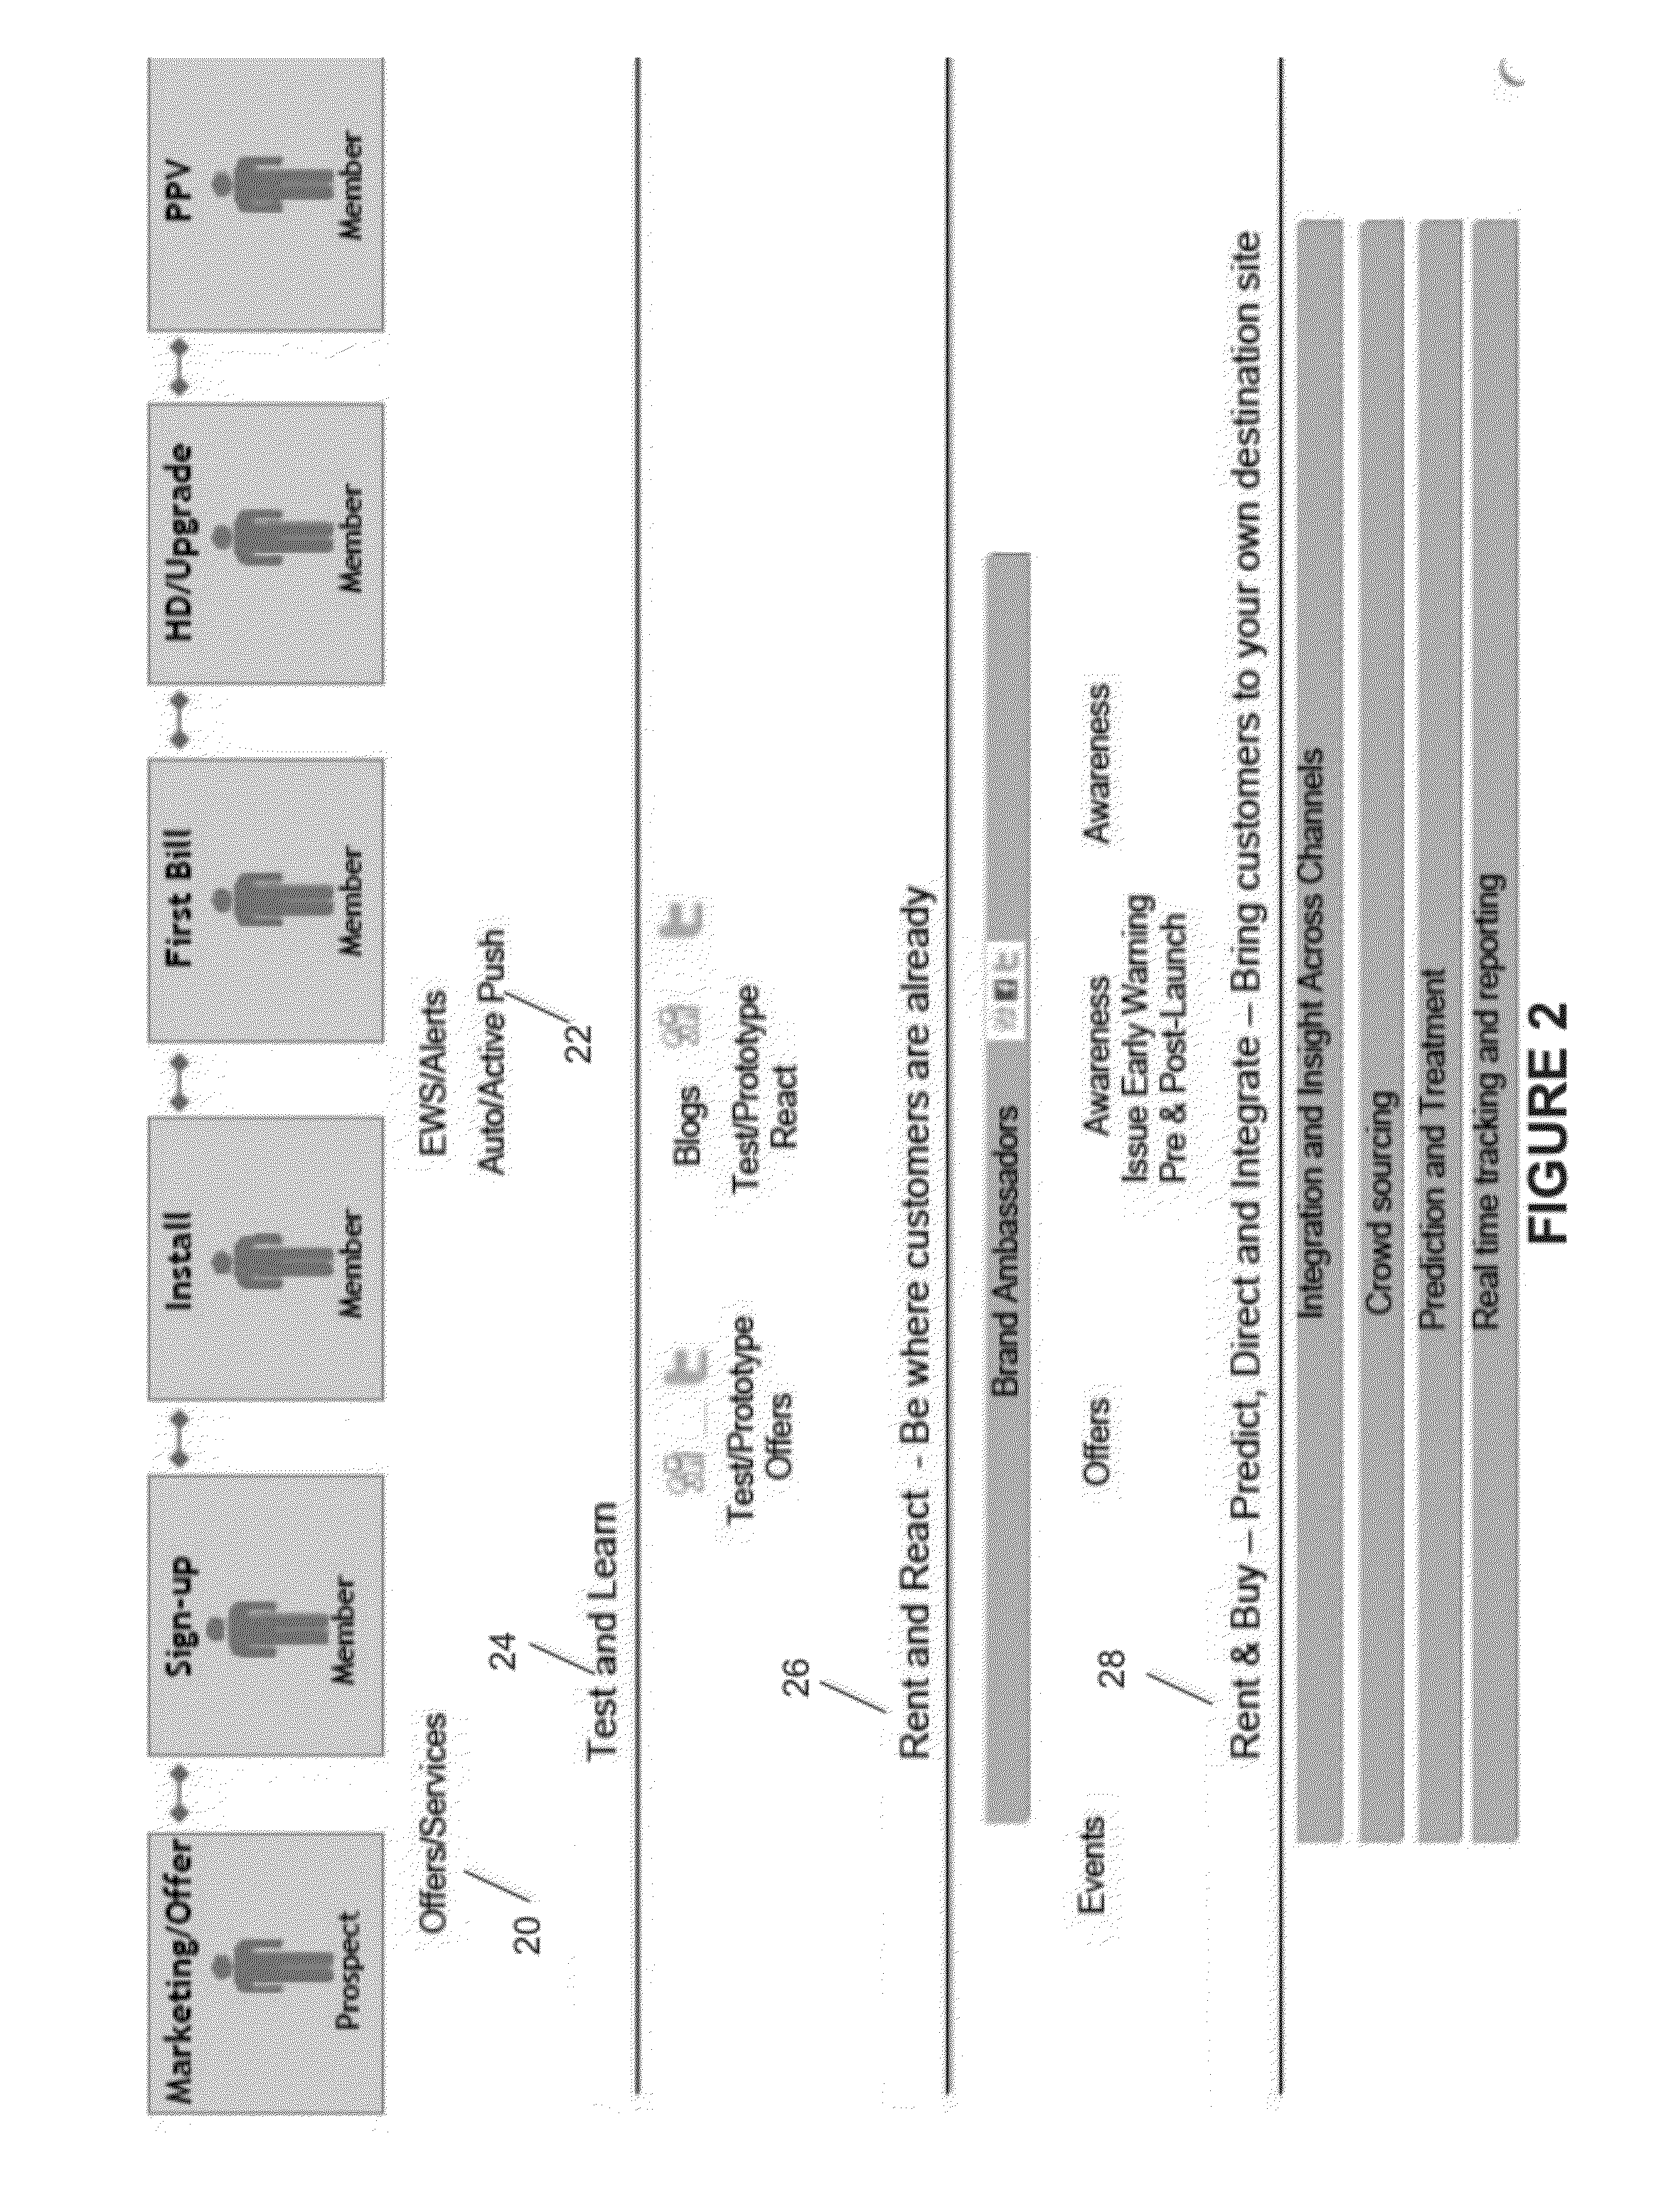 Method and Apparatus for Analyzing and Applying Data Related to Customer Interactions with Social Media